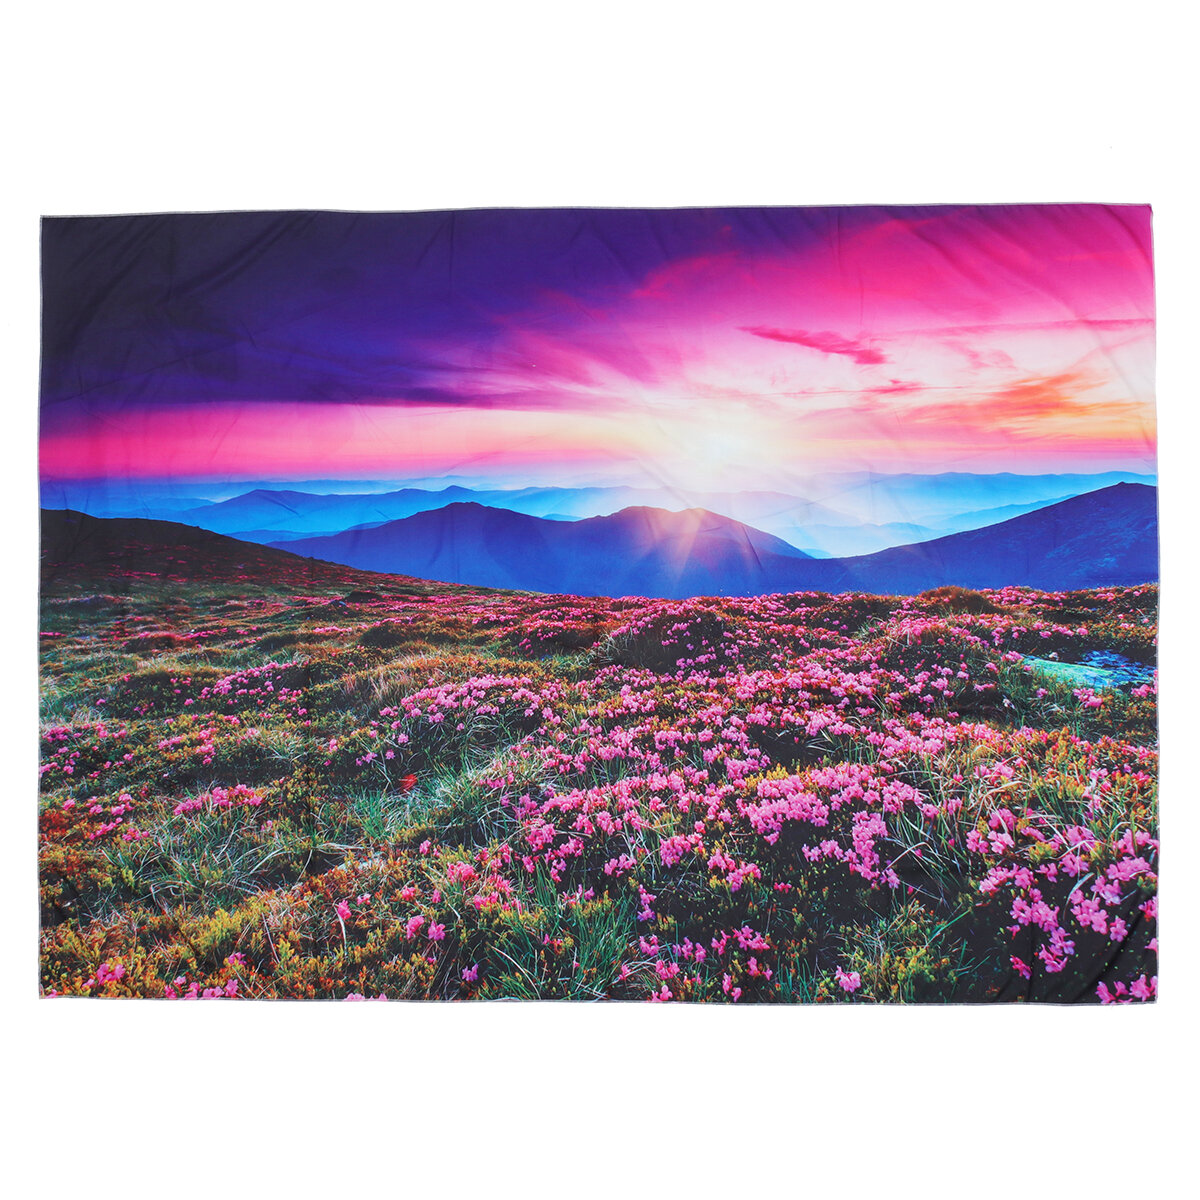 

Wall Decorative Tapestry Sunset Art Pictures Frameless Wall Hanging Decorations Painting for Home Office